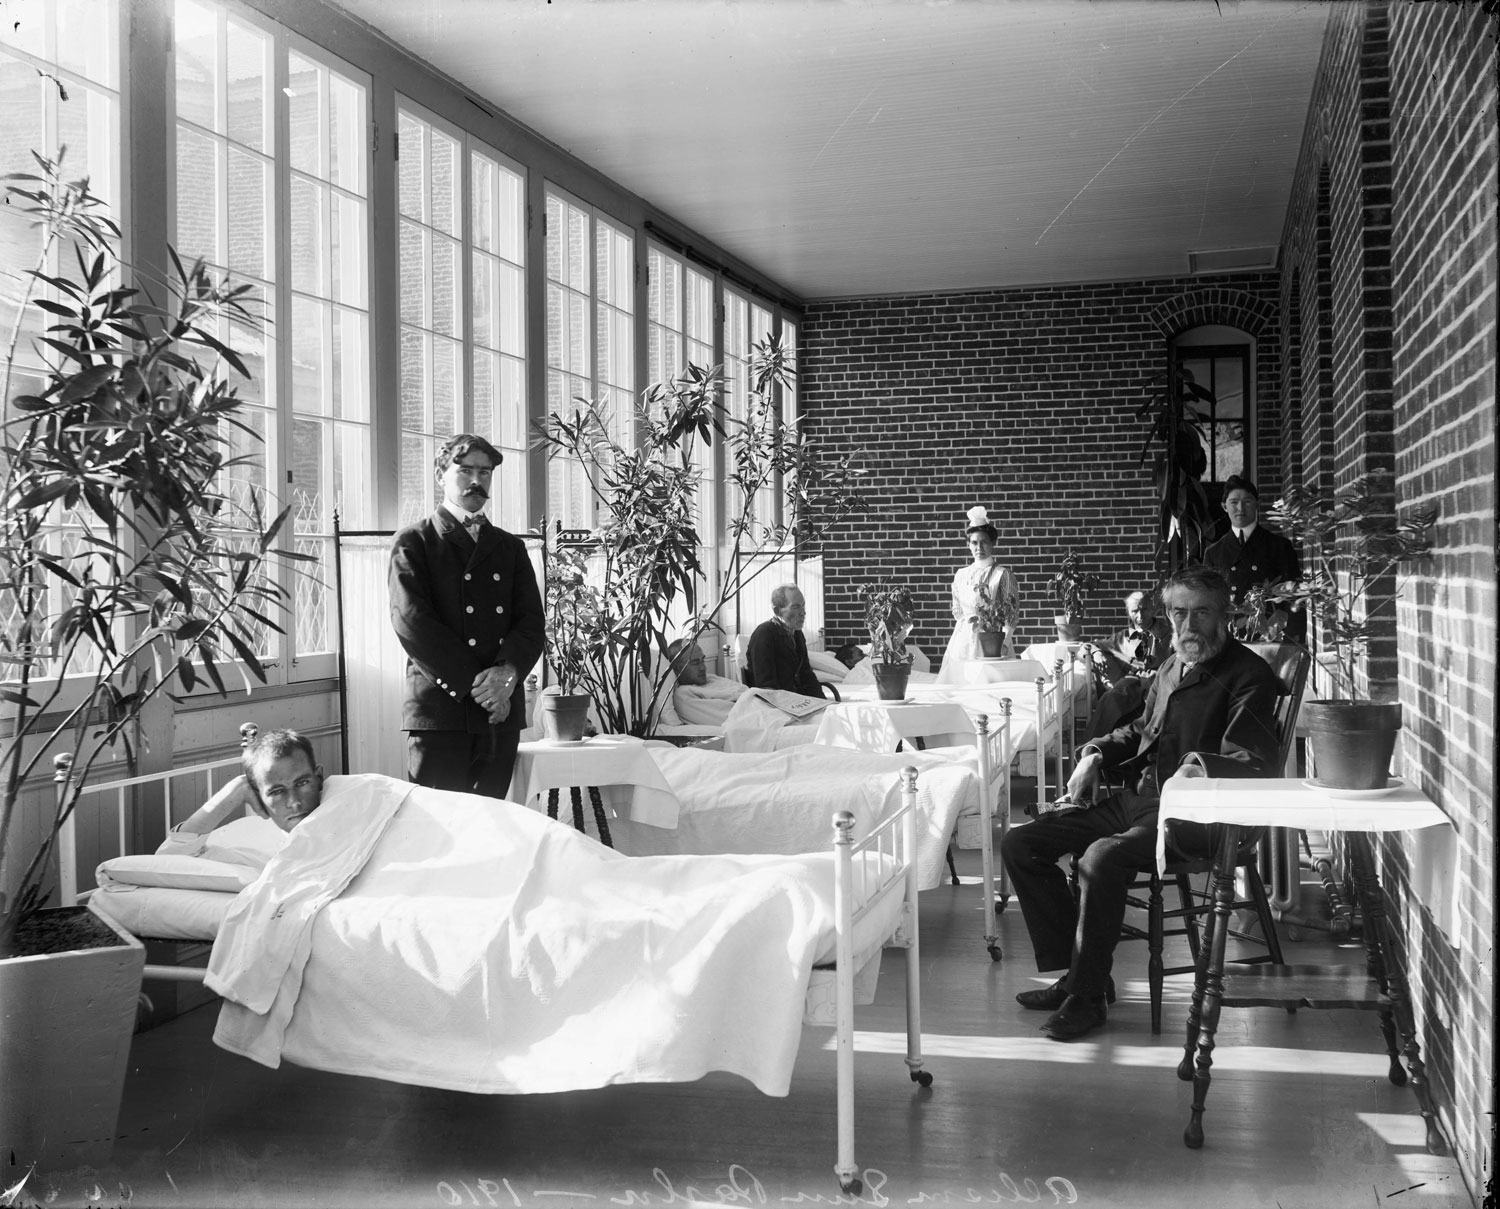 The porches of the 1890s Allison Buildings were later enclosed to provide more space for patient beds. Courtesy of the National Archives and Records Administration, 1910